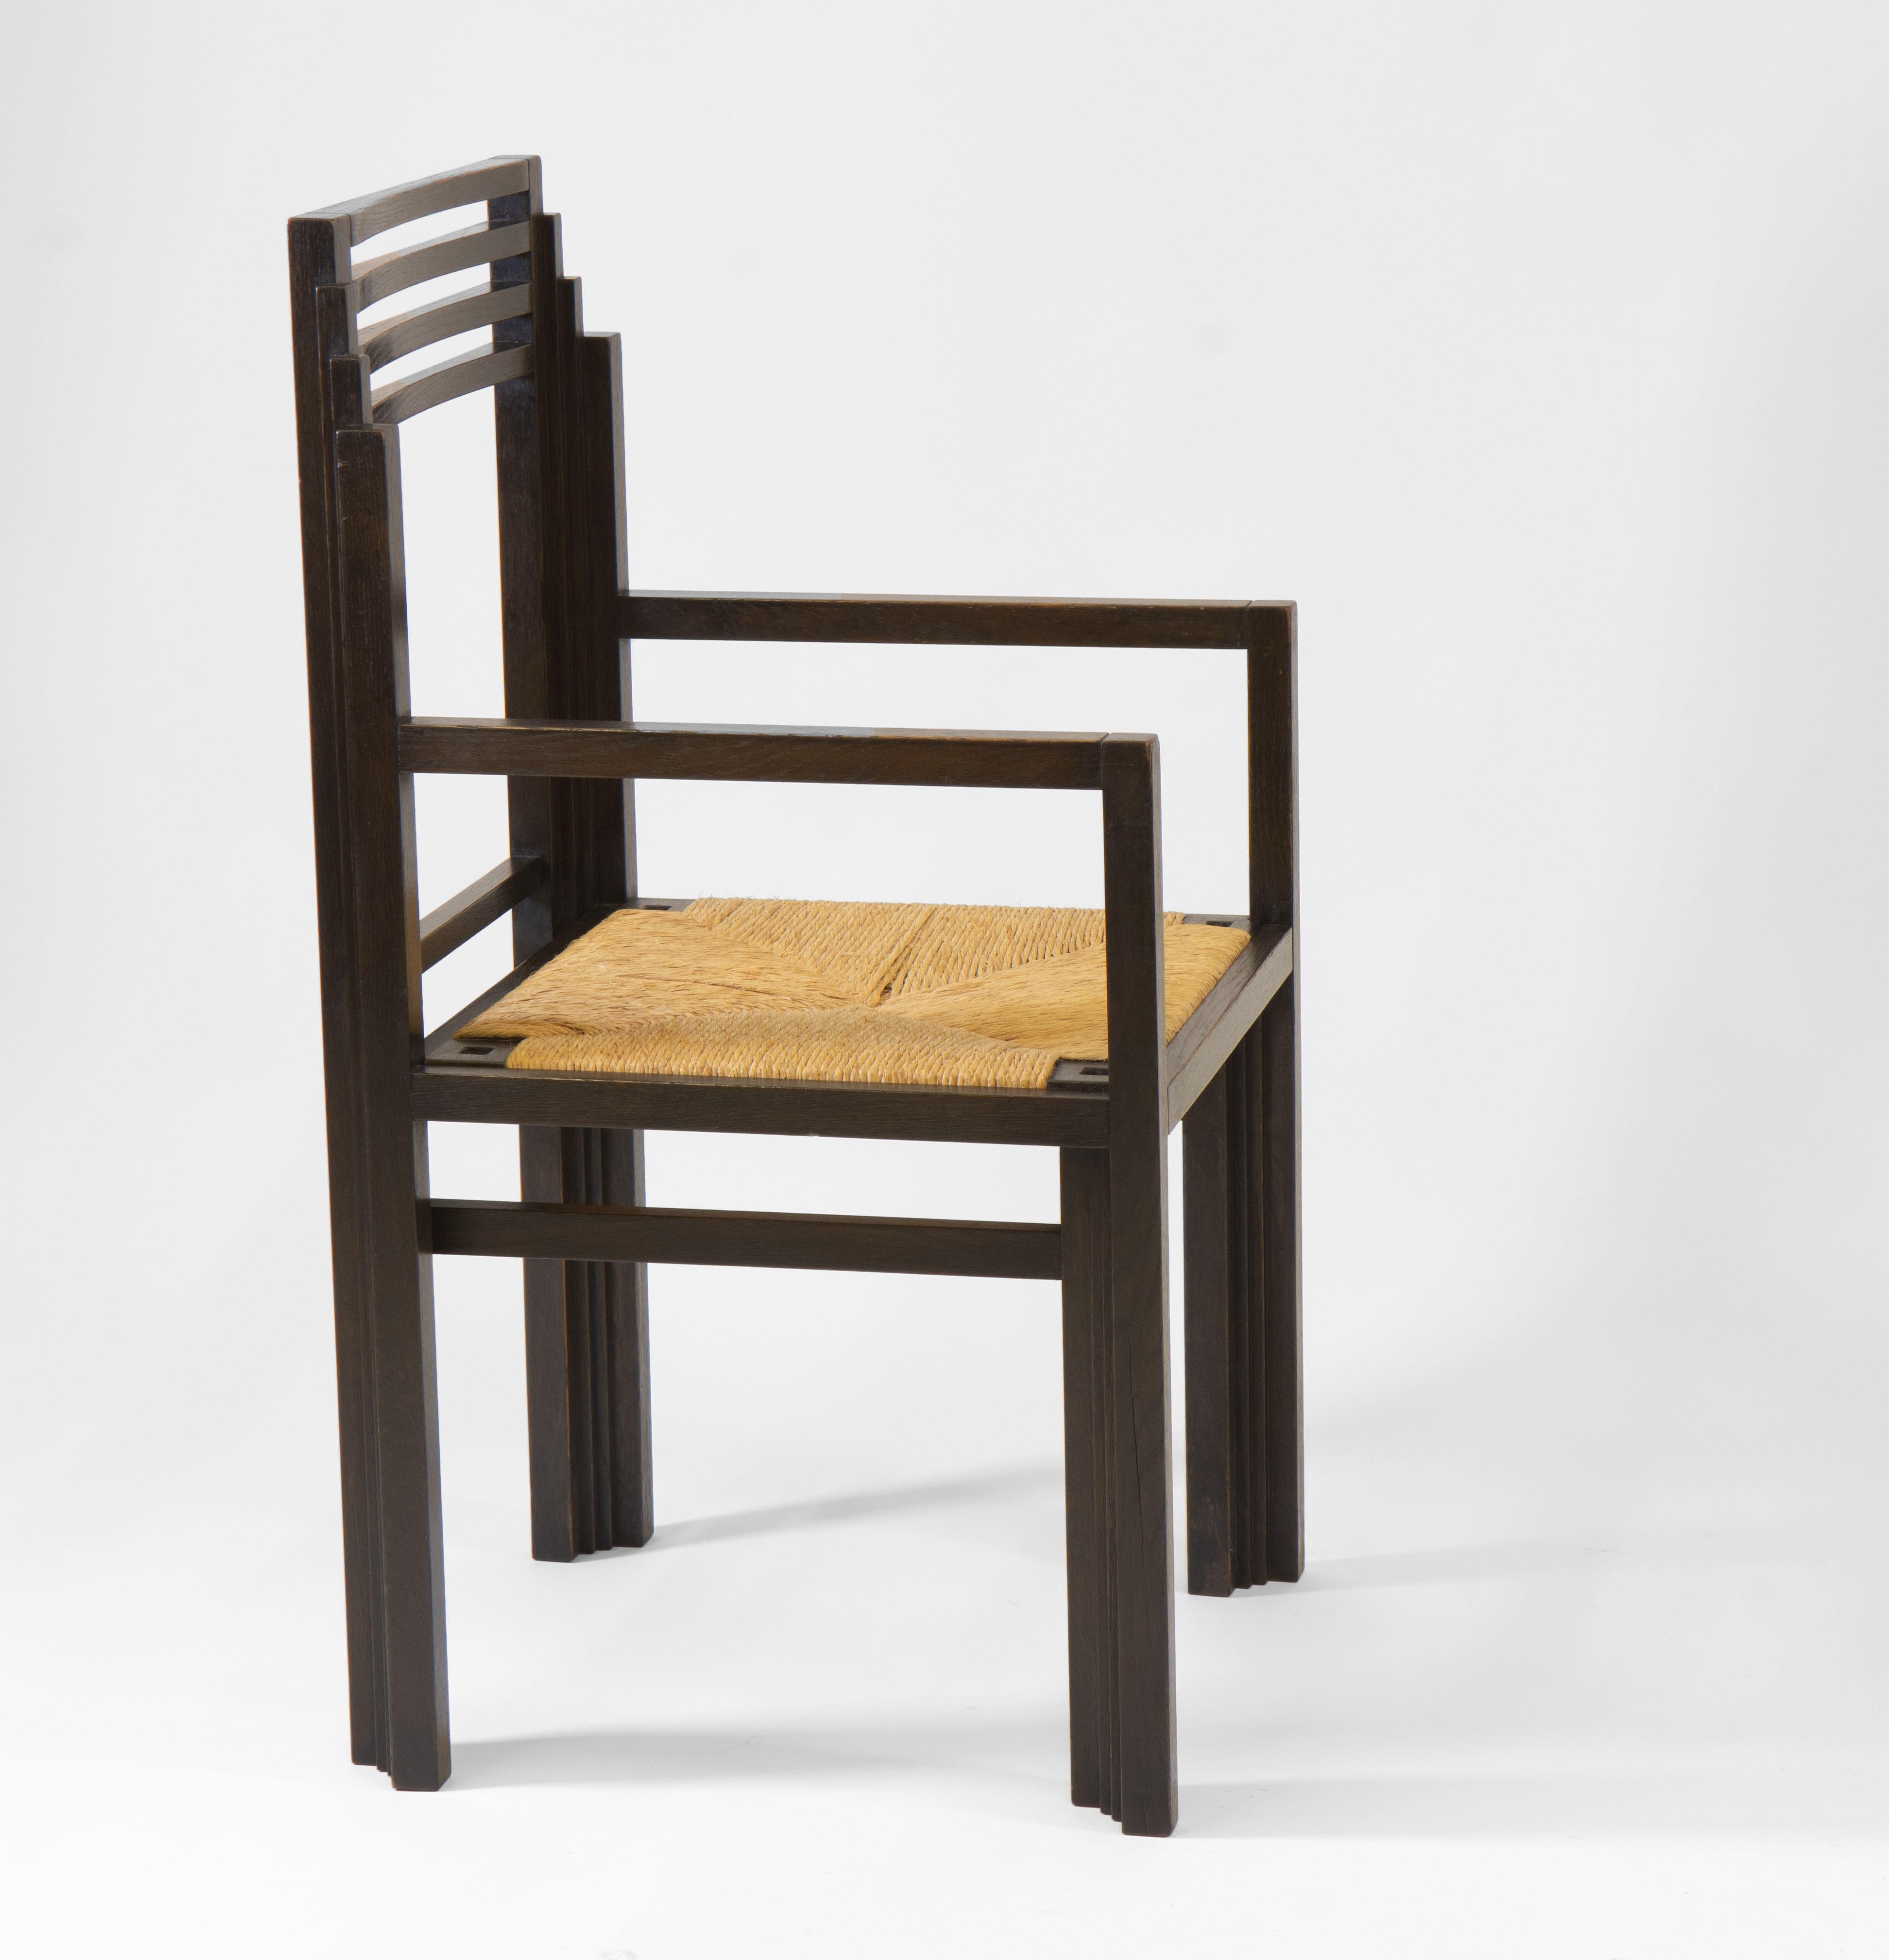 Superb and rare set of six Postmodern bridge dining chairs attributed to Hans Hollein (1934–2014) Austrian architect and designer. Circa 1986.

These fabulous chairs have a fabulous architectural skyscraper design to them. They are made in solid oak